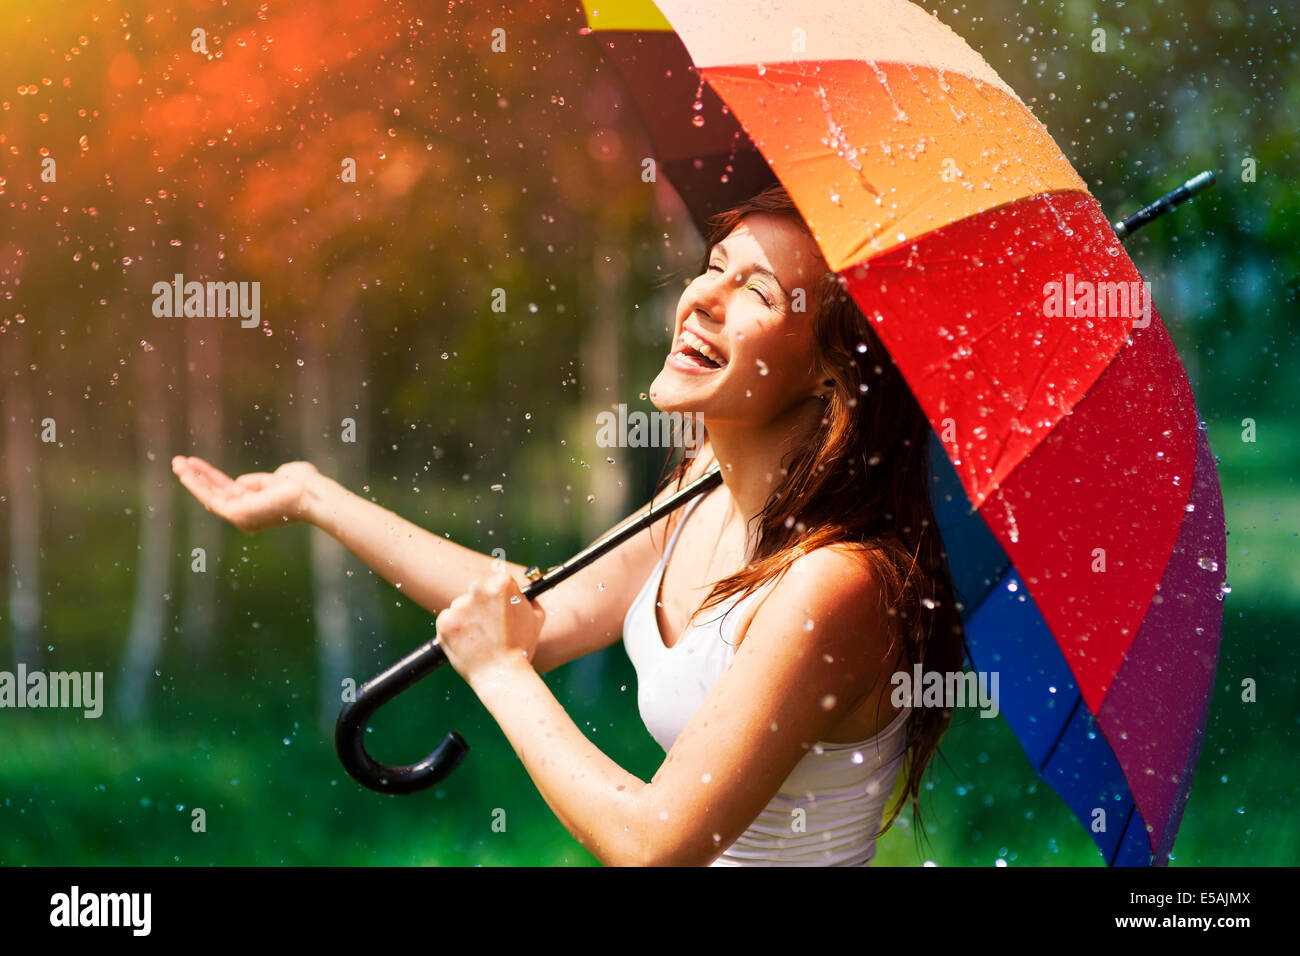 Laughing woman with umbrella checking for rain, Debica, Poland Stock Photo